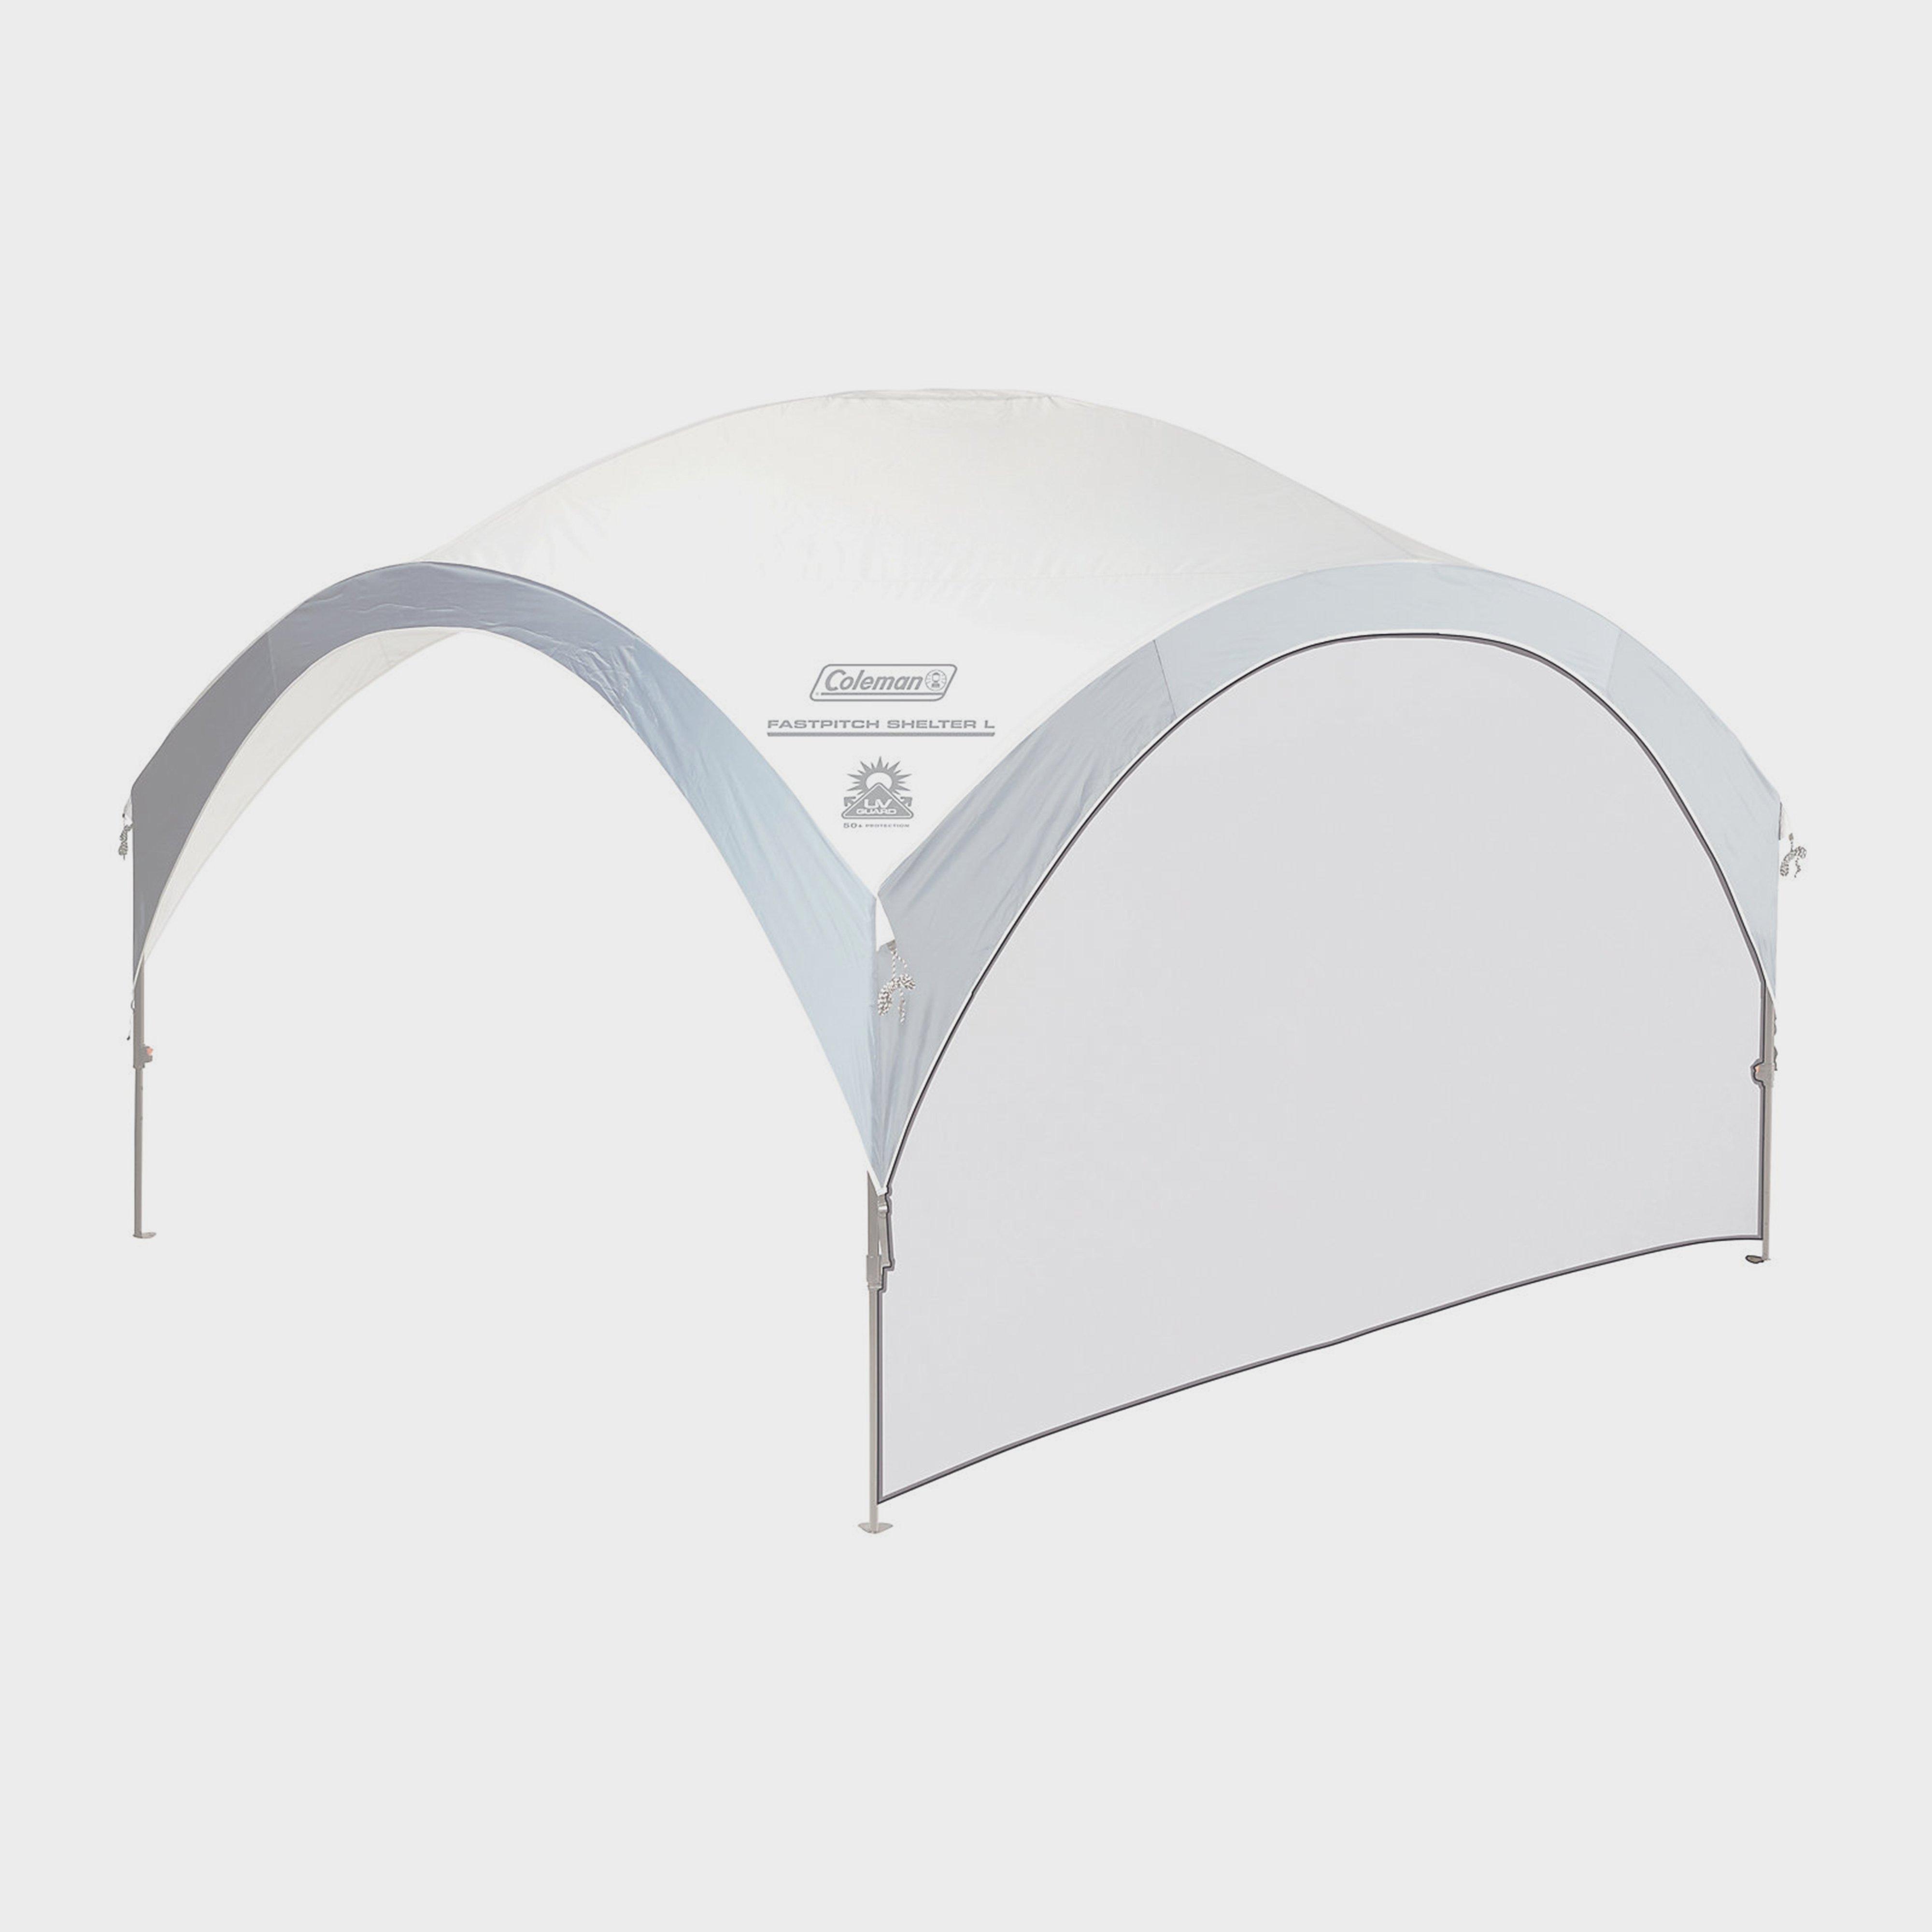  COLEMAN FastPitch Event Shelter Pro L Sunwall, White